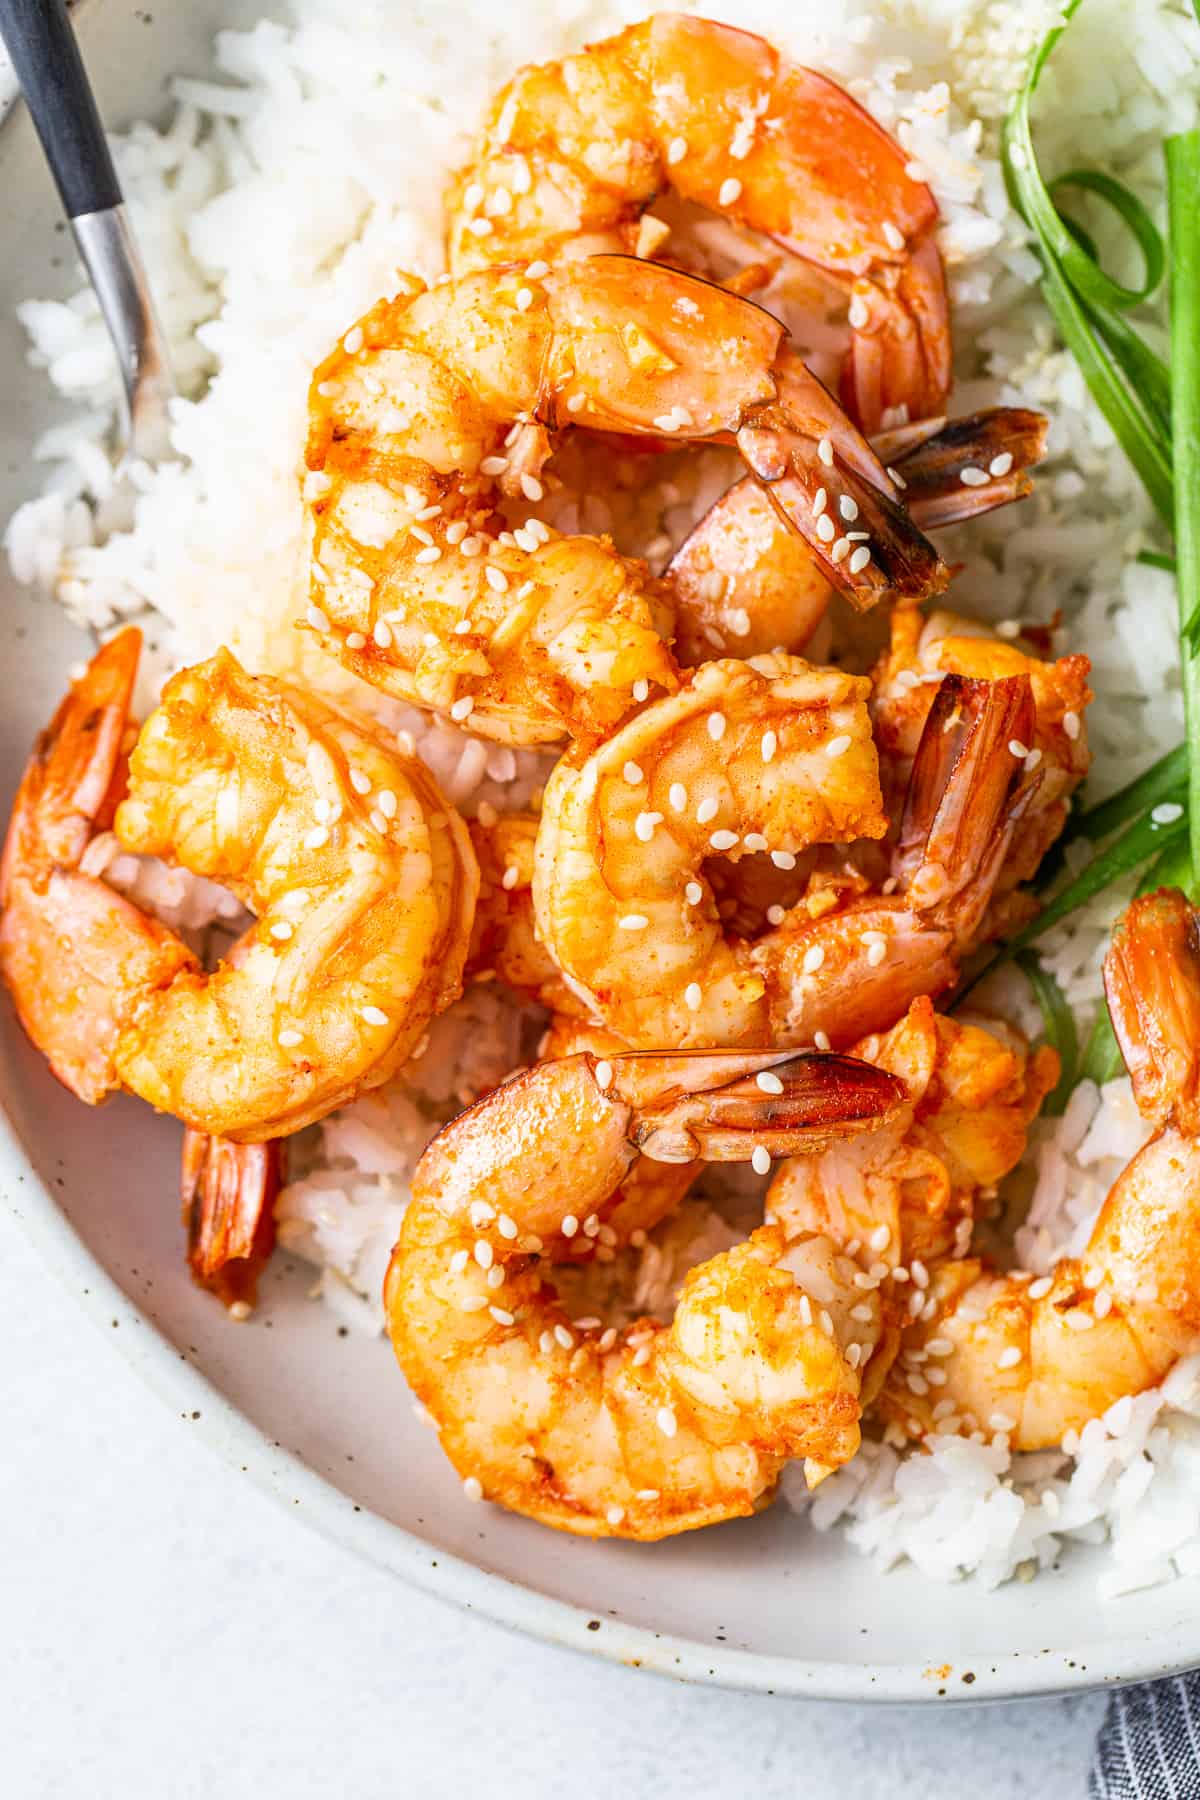 Spicy garlic prawns in a bowl with rice.